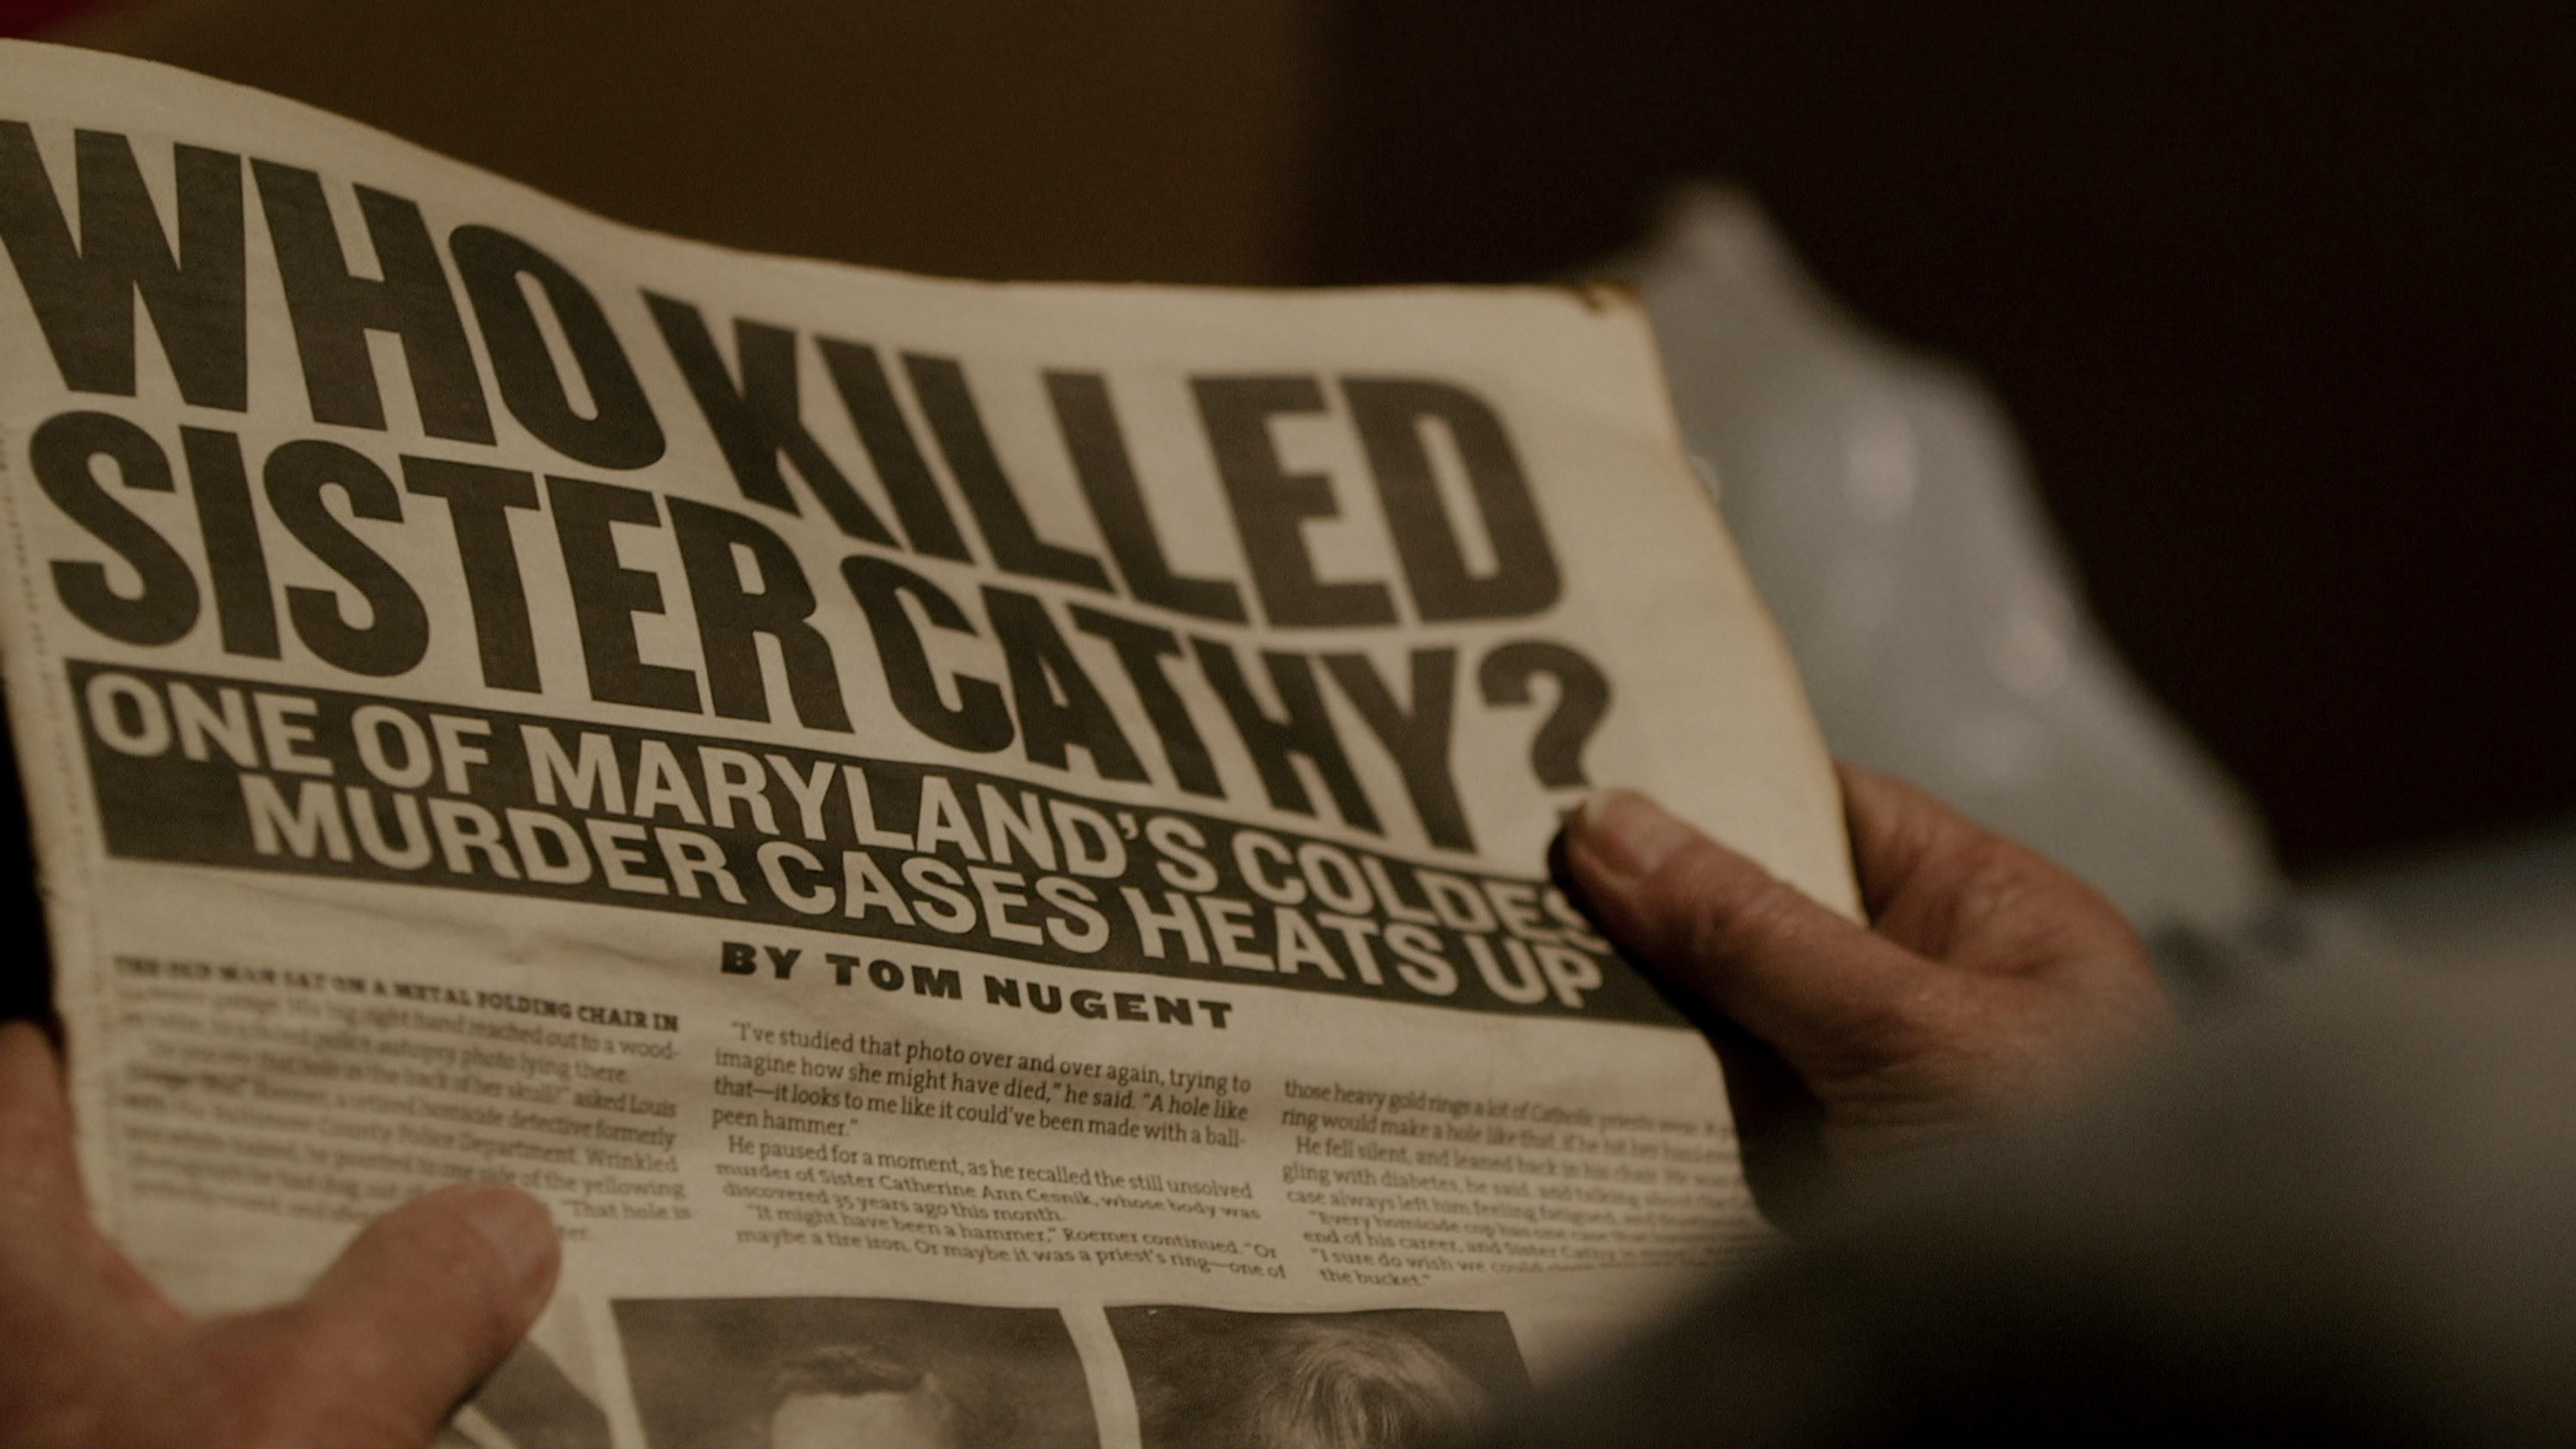 A newspaper reading &quot;WHO KILLED SISTER CATHY?&quot;